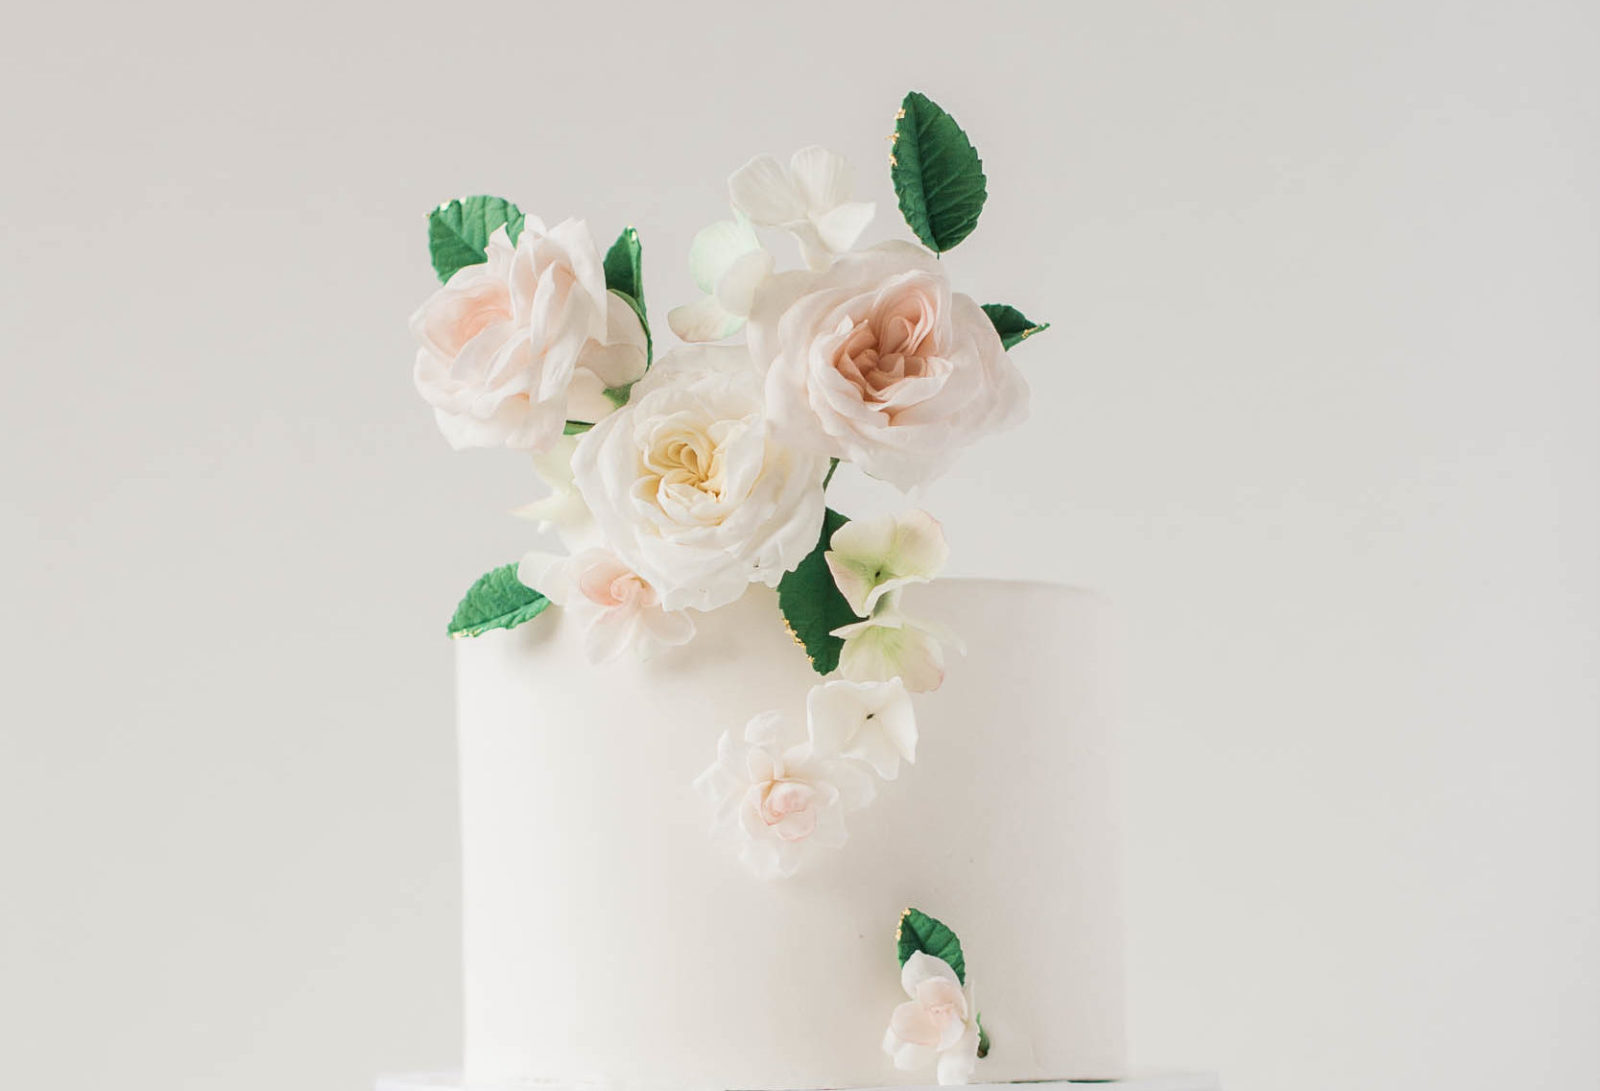 25 Small But Beautiful One-Tier Wedding Cakes Featured by Brontë Bride